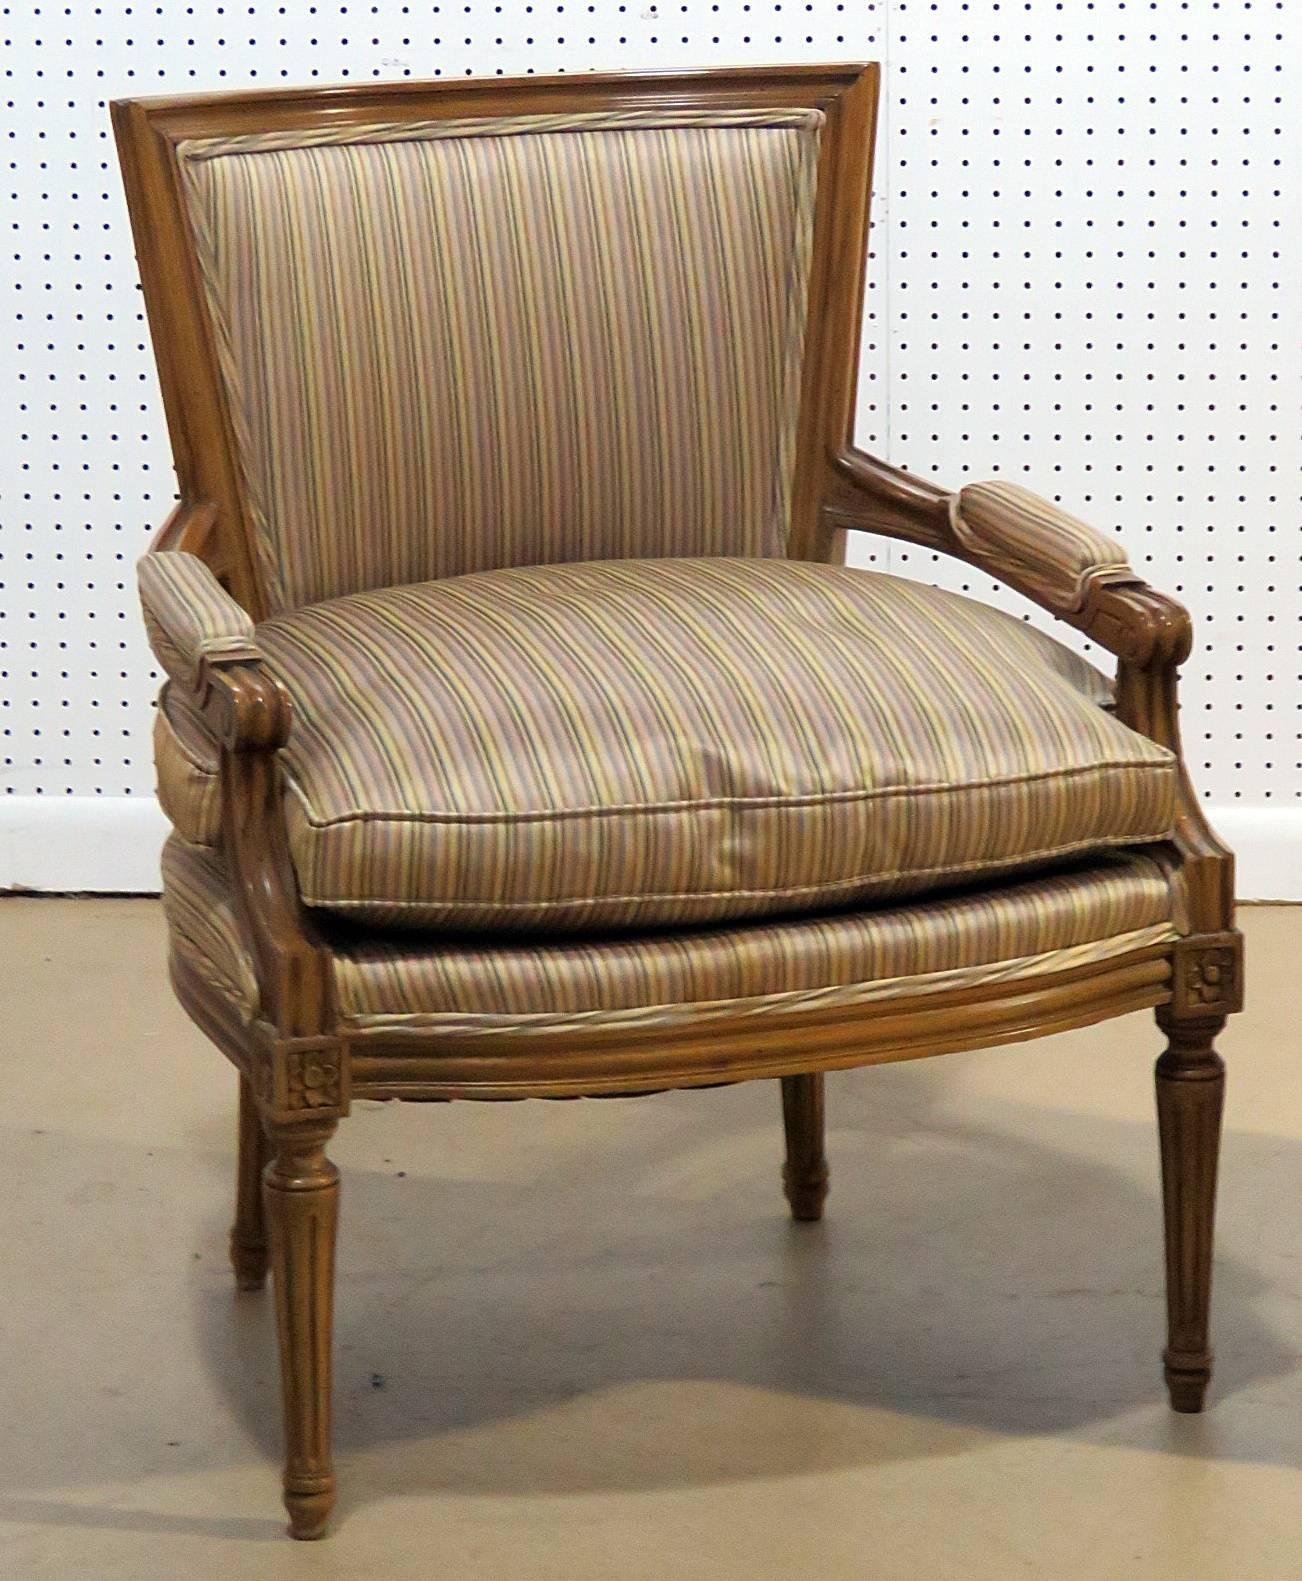 Pair of Sloane Louis XVI style armchairs with down filled cushions. Measures: 20